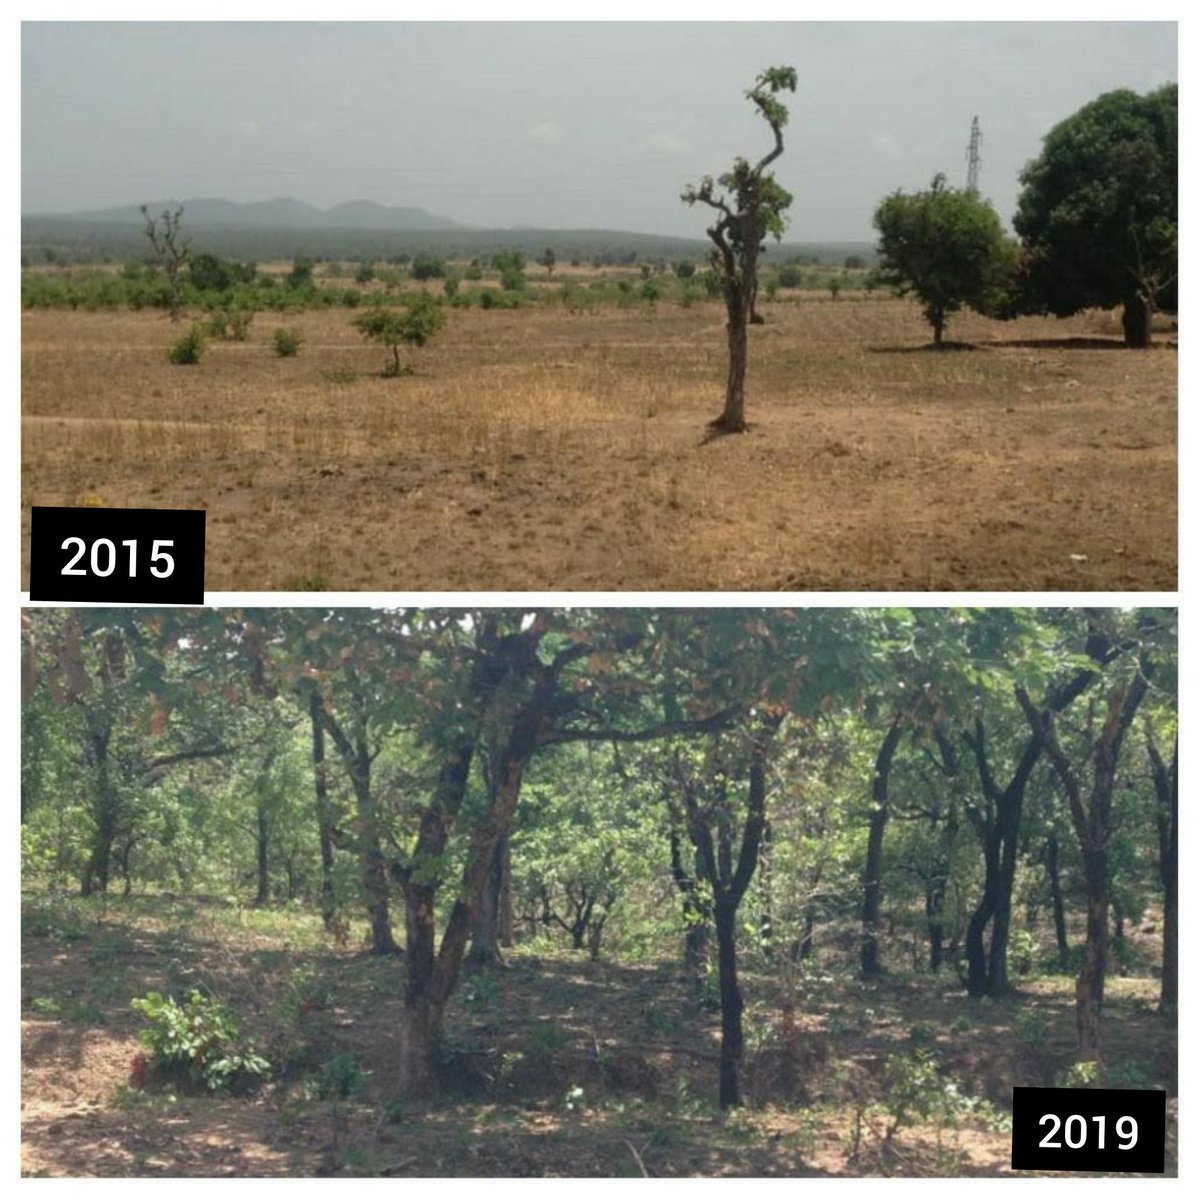 Our mission is to replicate this success practice accross Africa to diliver action on @UN #RestorationDecade within the context of @UNCCD #LDN #GreatGreenWall #Afr100 @UNBiodiversity @IPBES @FoodSystems

Thanks @TimChristo @mremae
@UNCCDcso @Agnes_Kalibata @tangem2009 @PfRglobal